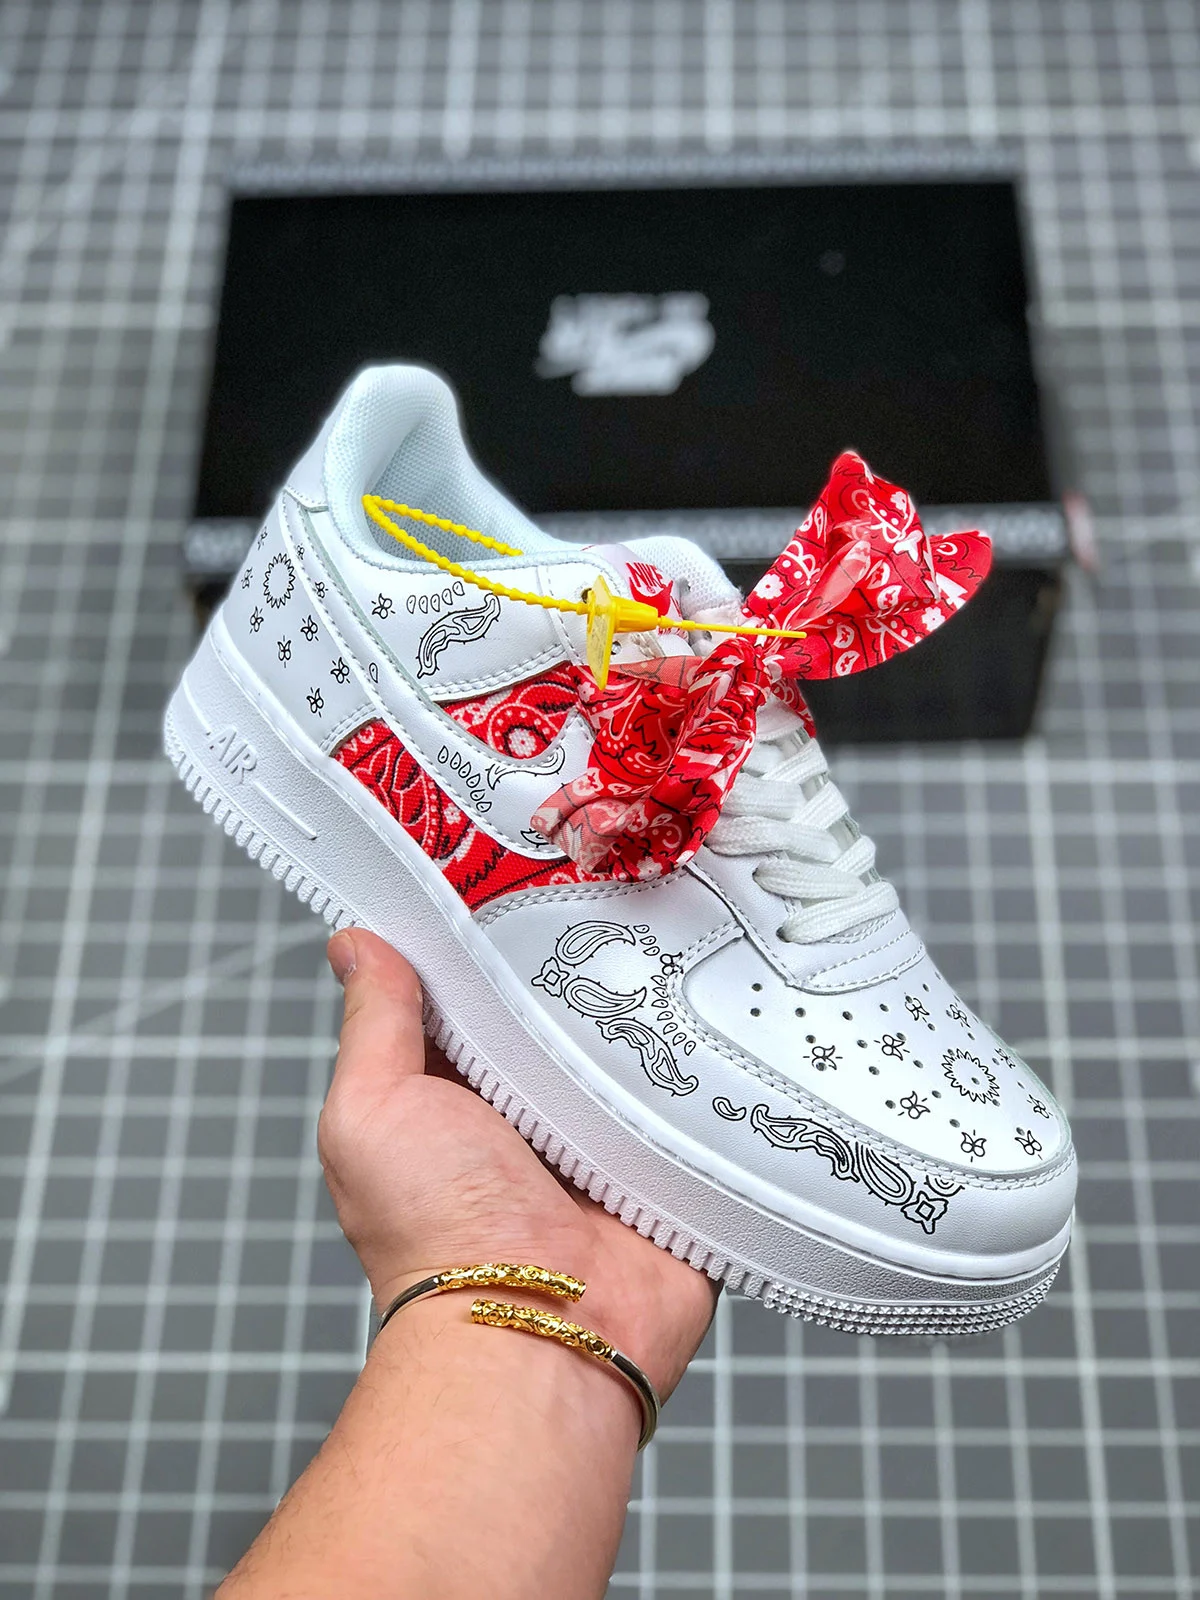 Custom x Nike Air Force 1 Low White Red Black For Sale